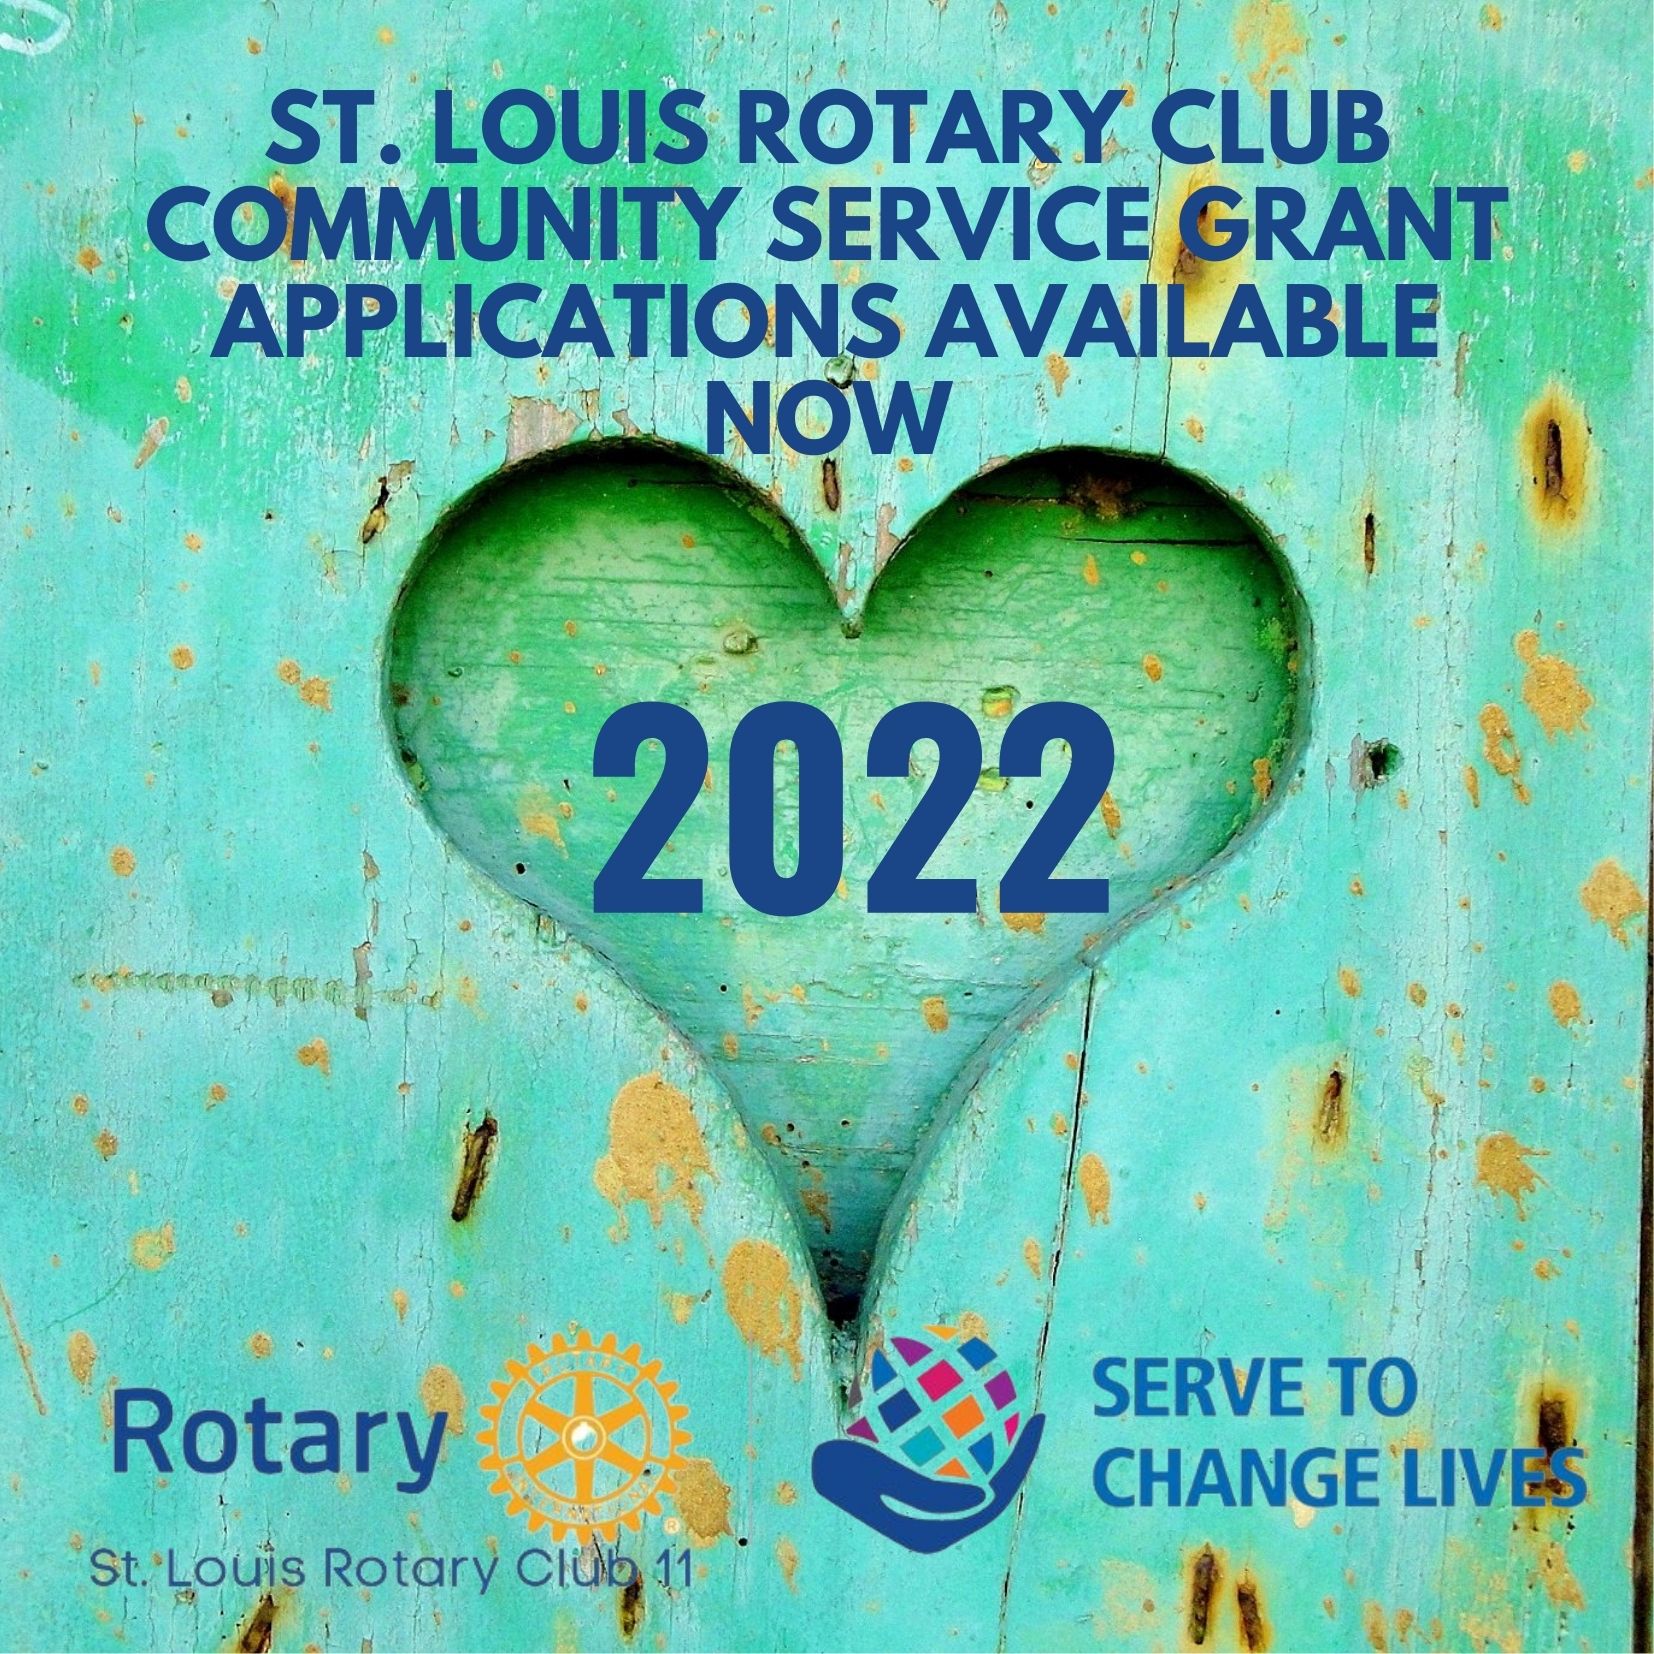 st. Louis Rotary community service grant applications are now available. for 2022